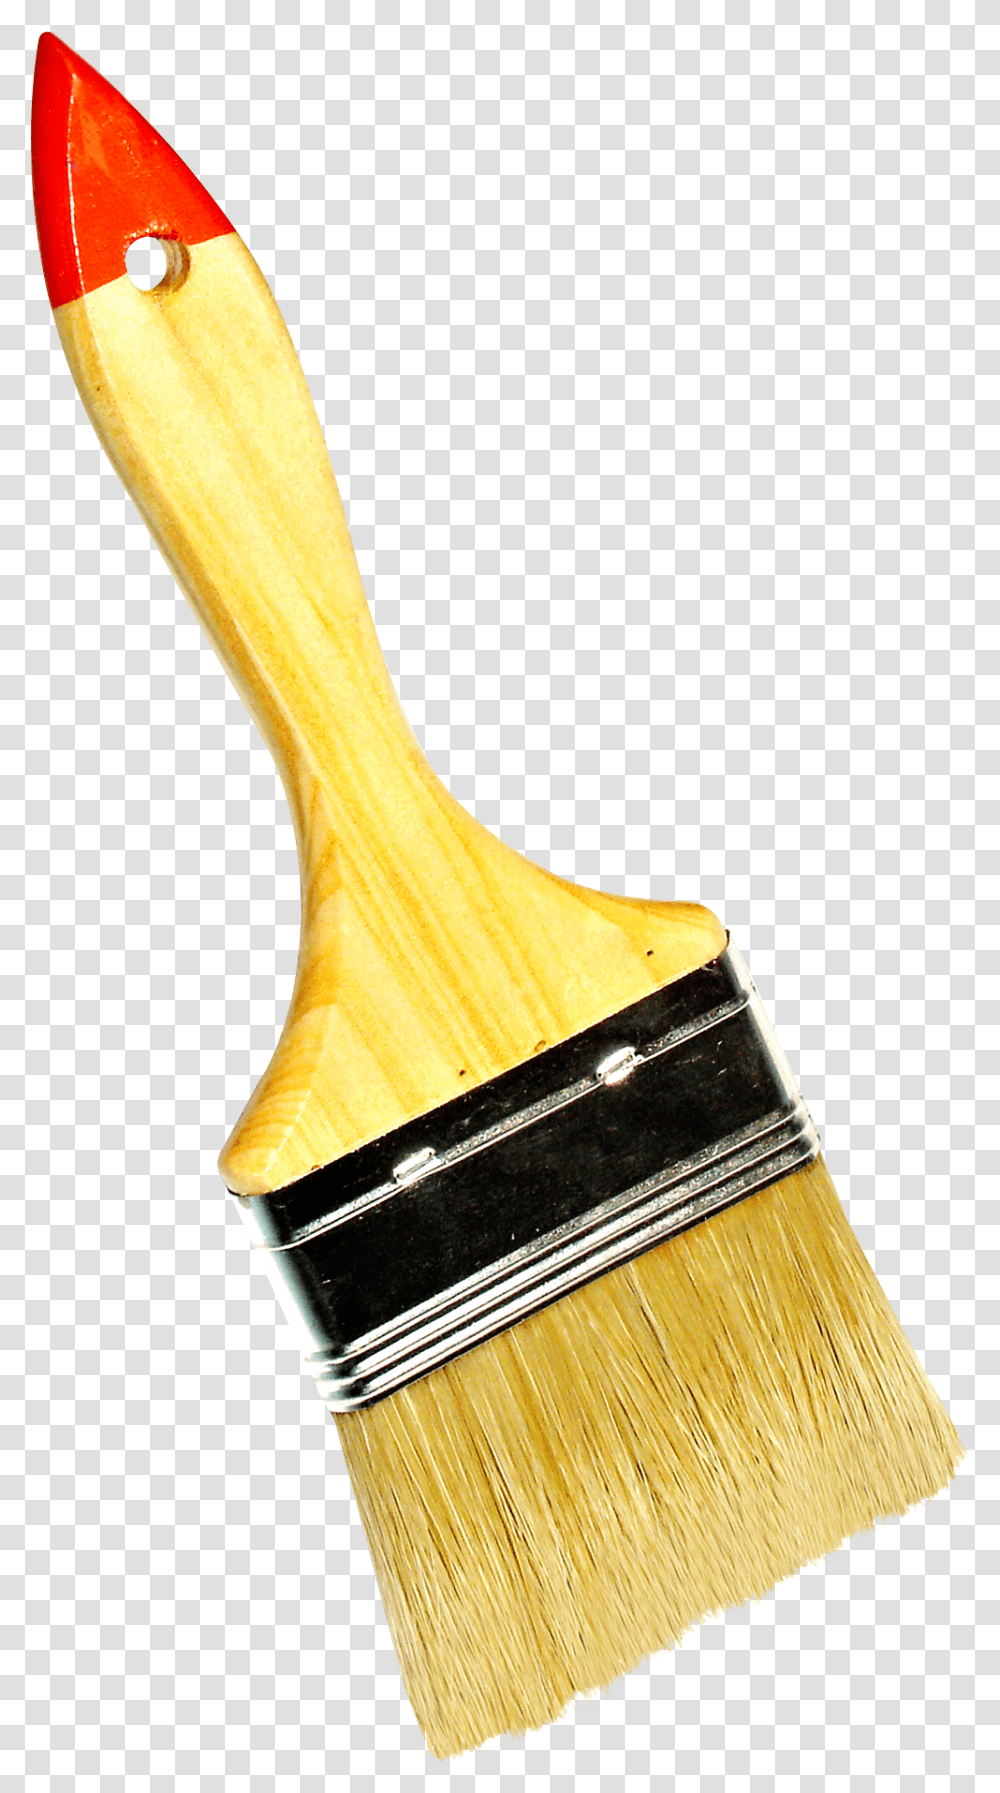 Paint Brush Image Paint Brush Images, Tool, Toothbrush Transparent Png